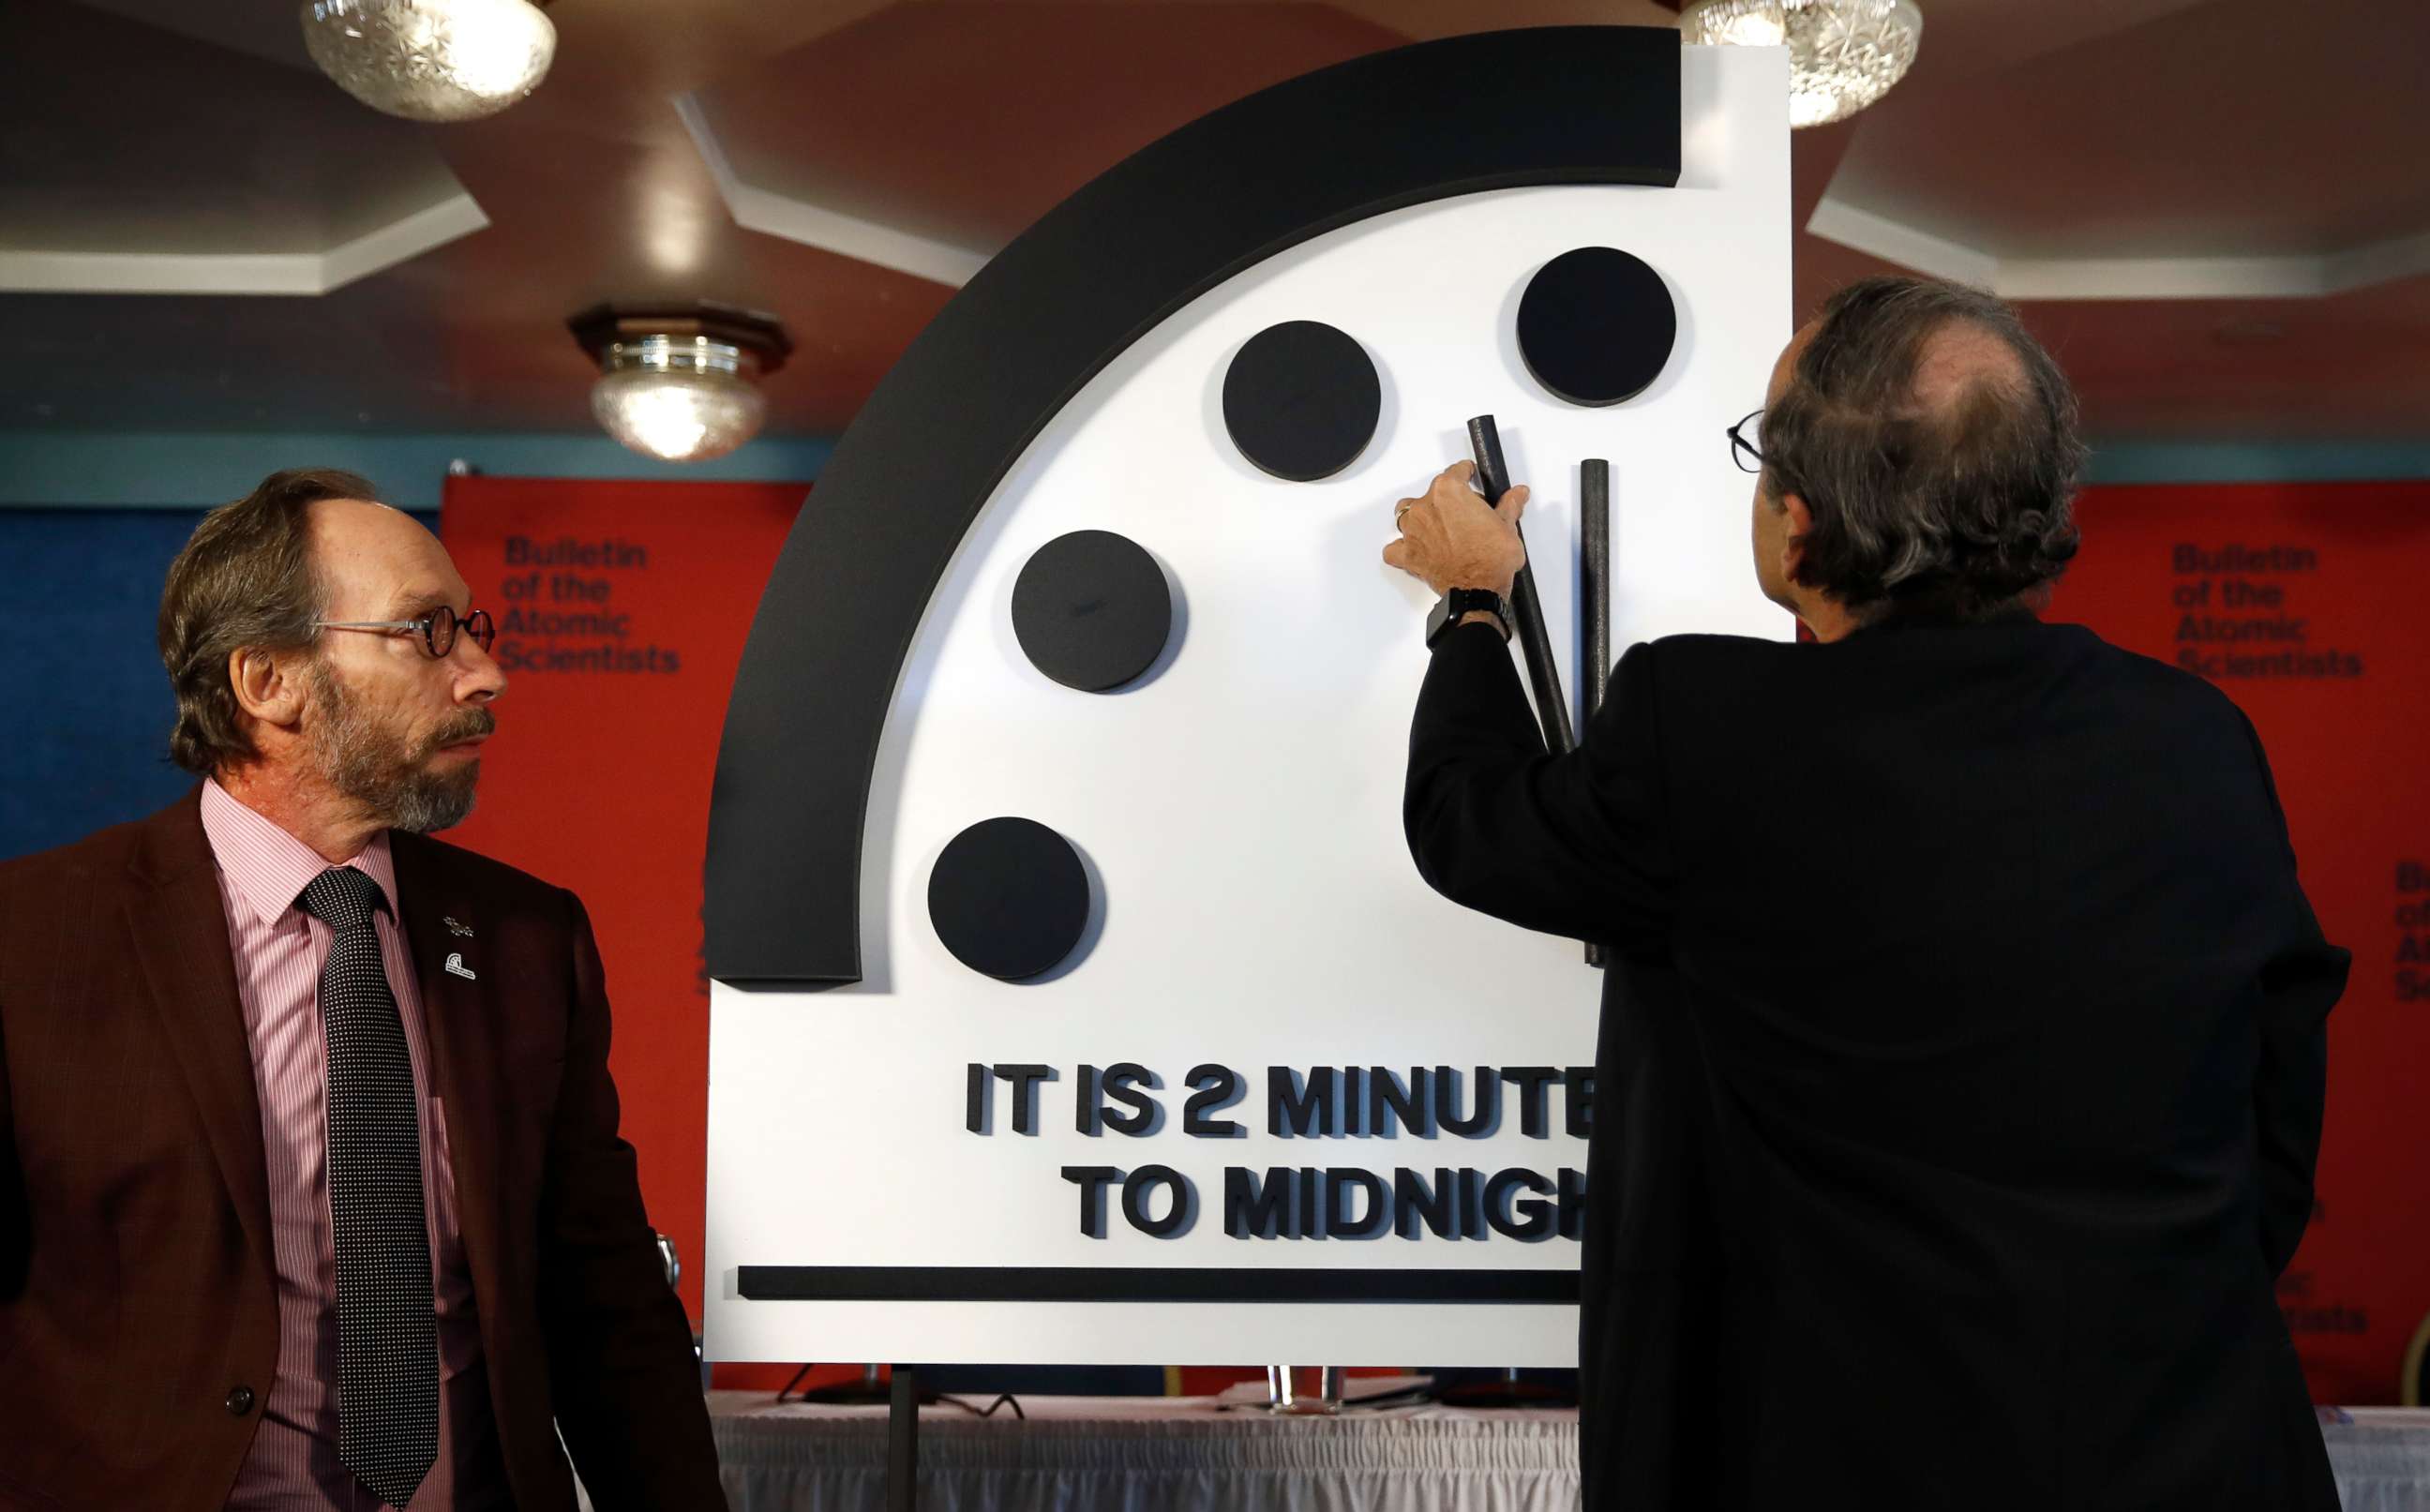 PHOTO: Robert Rosner, right, joined by Bulletin of the Atomic Scientists member Lawrence Krauss, left, moves the minute hand of the Doomsday Clock to two minutes to midnight during a news conference at the National Press Club in Washington, Jan. 25, 2018.